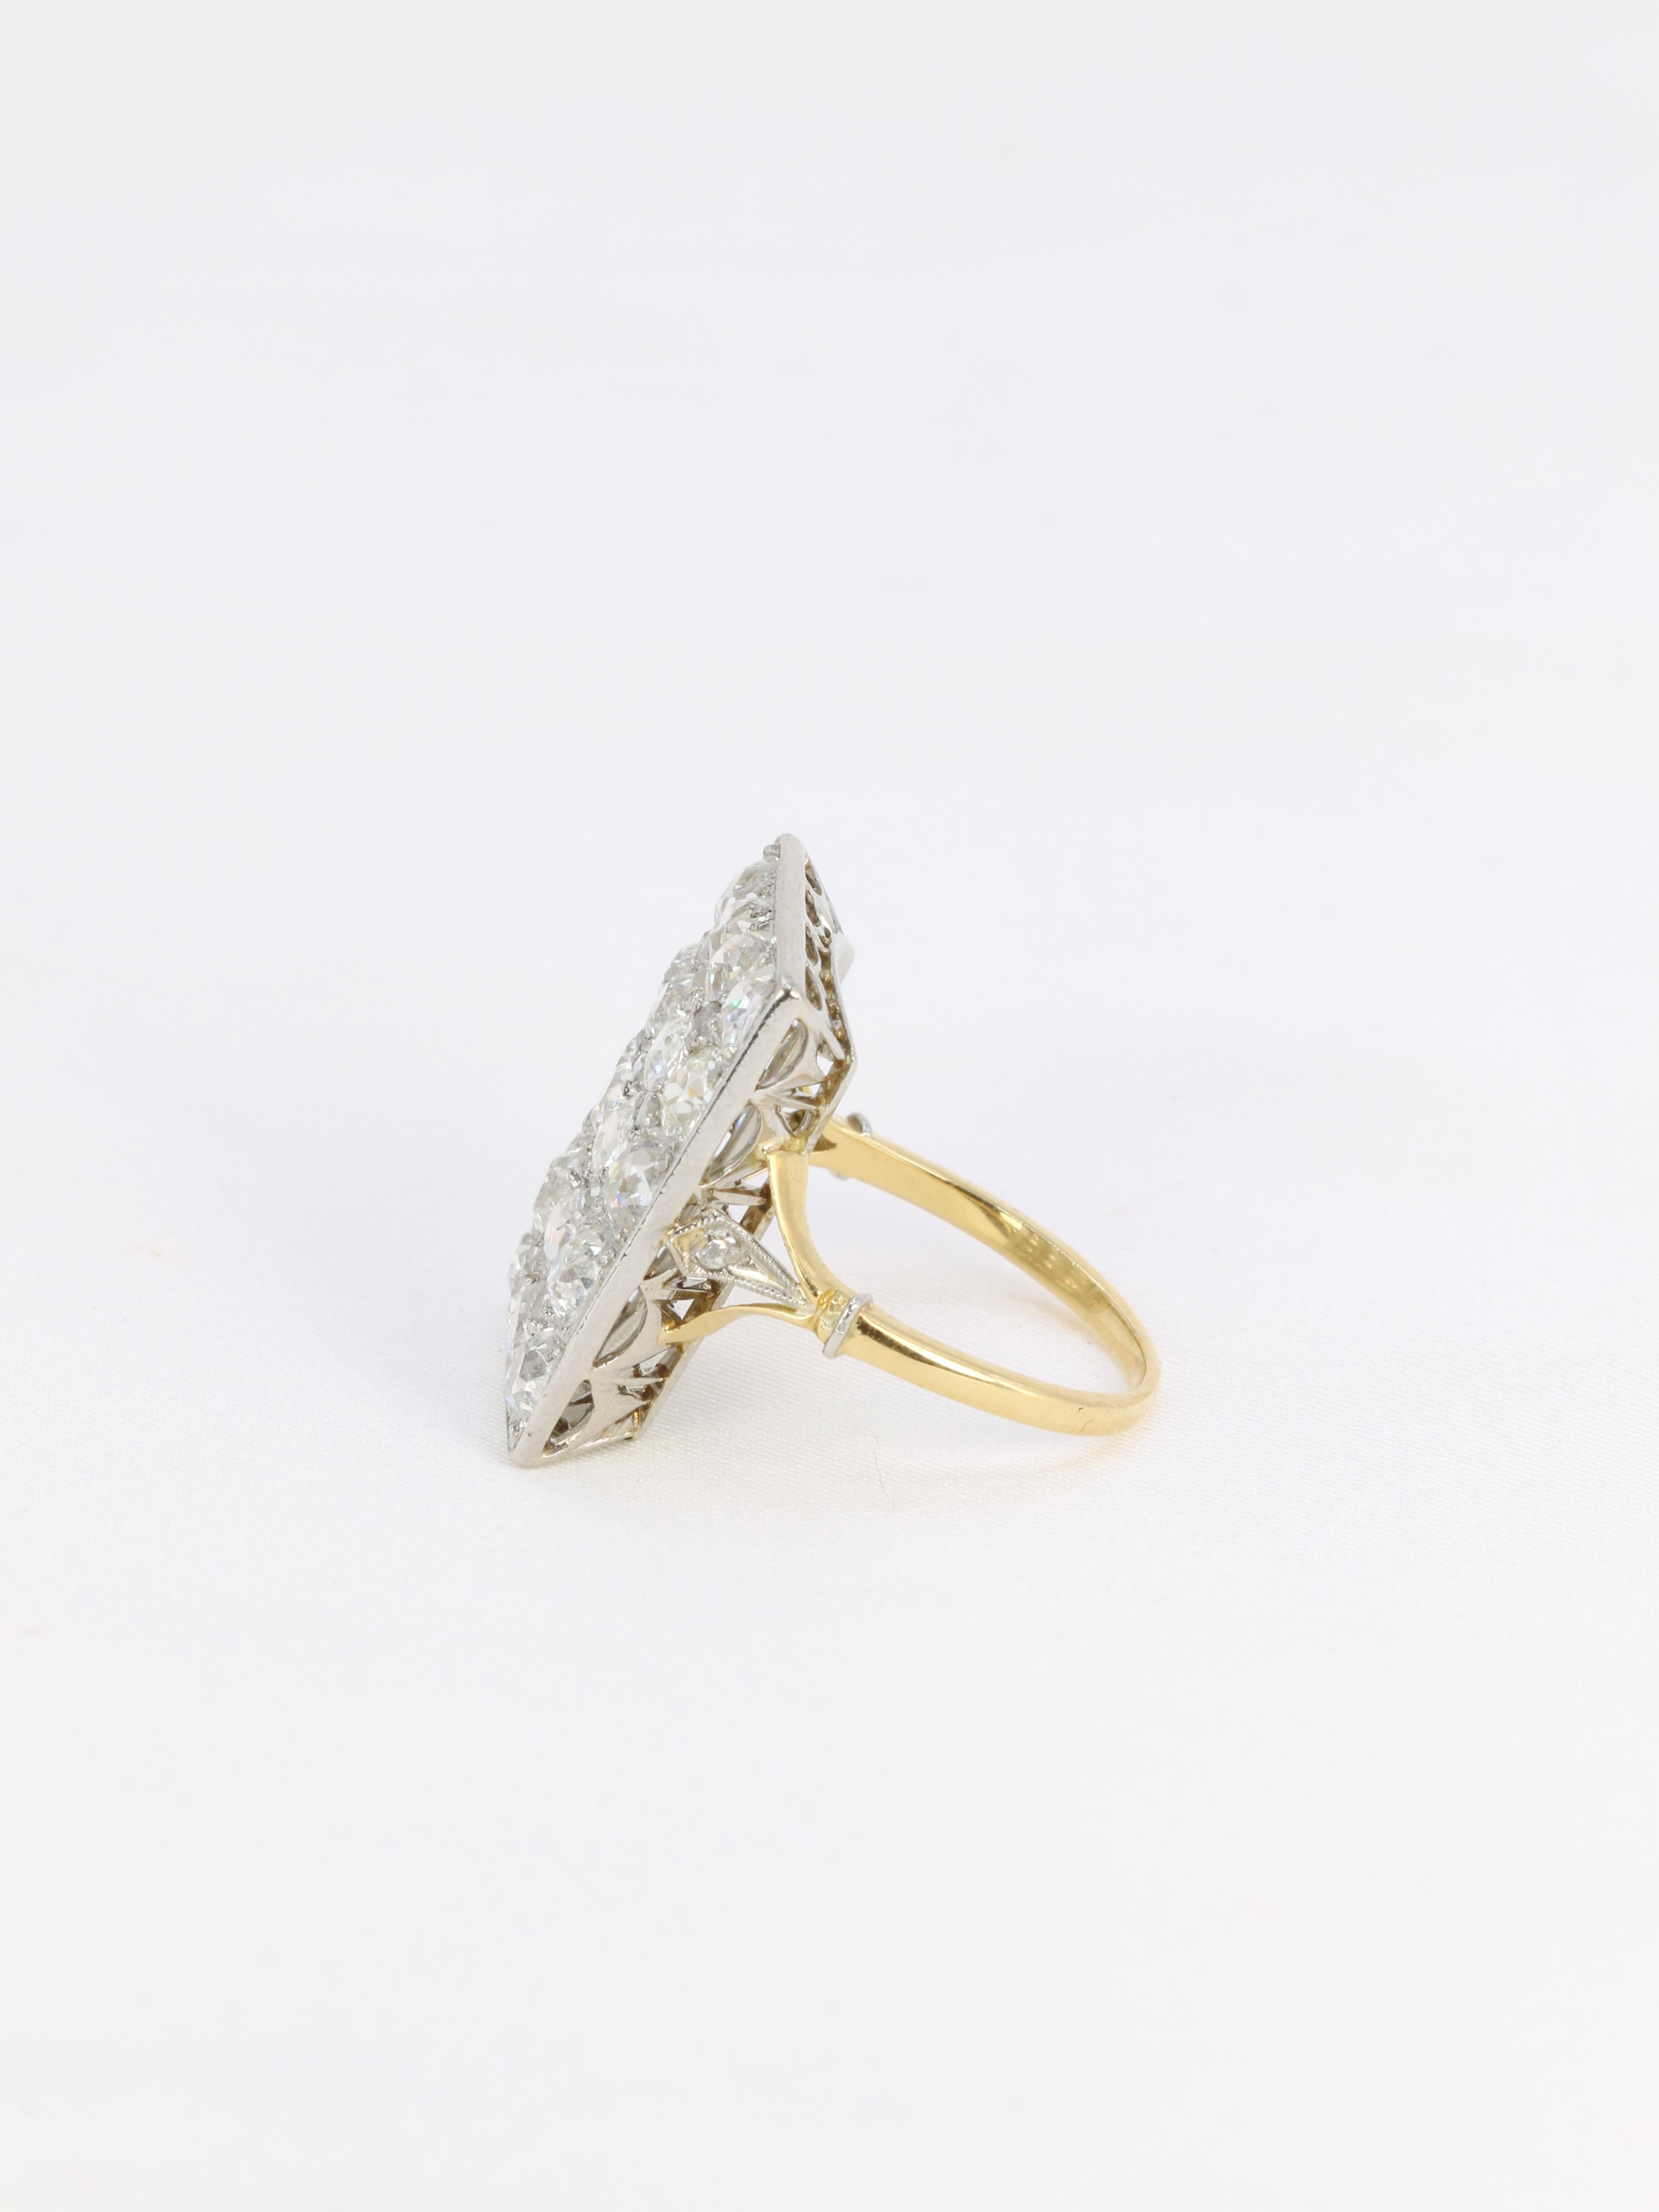 Women's Art Deco ring in gold set with old mine cut diamonds